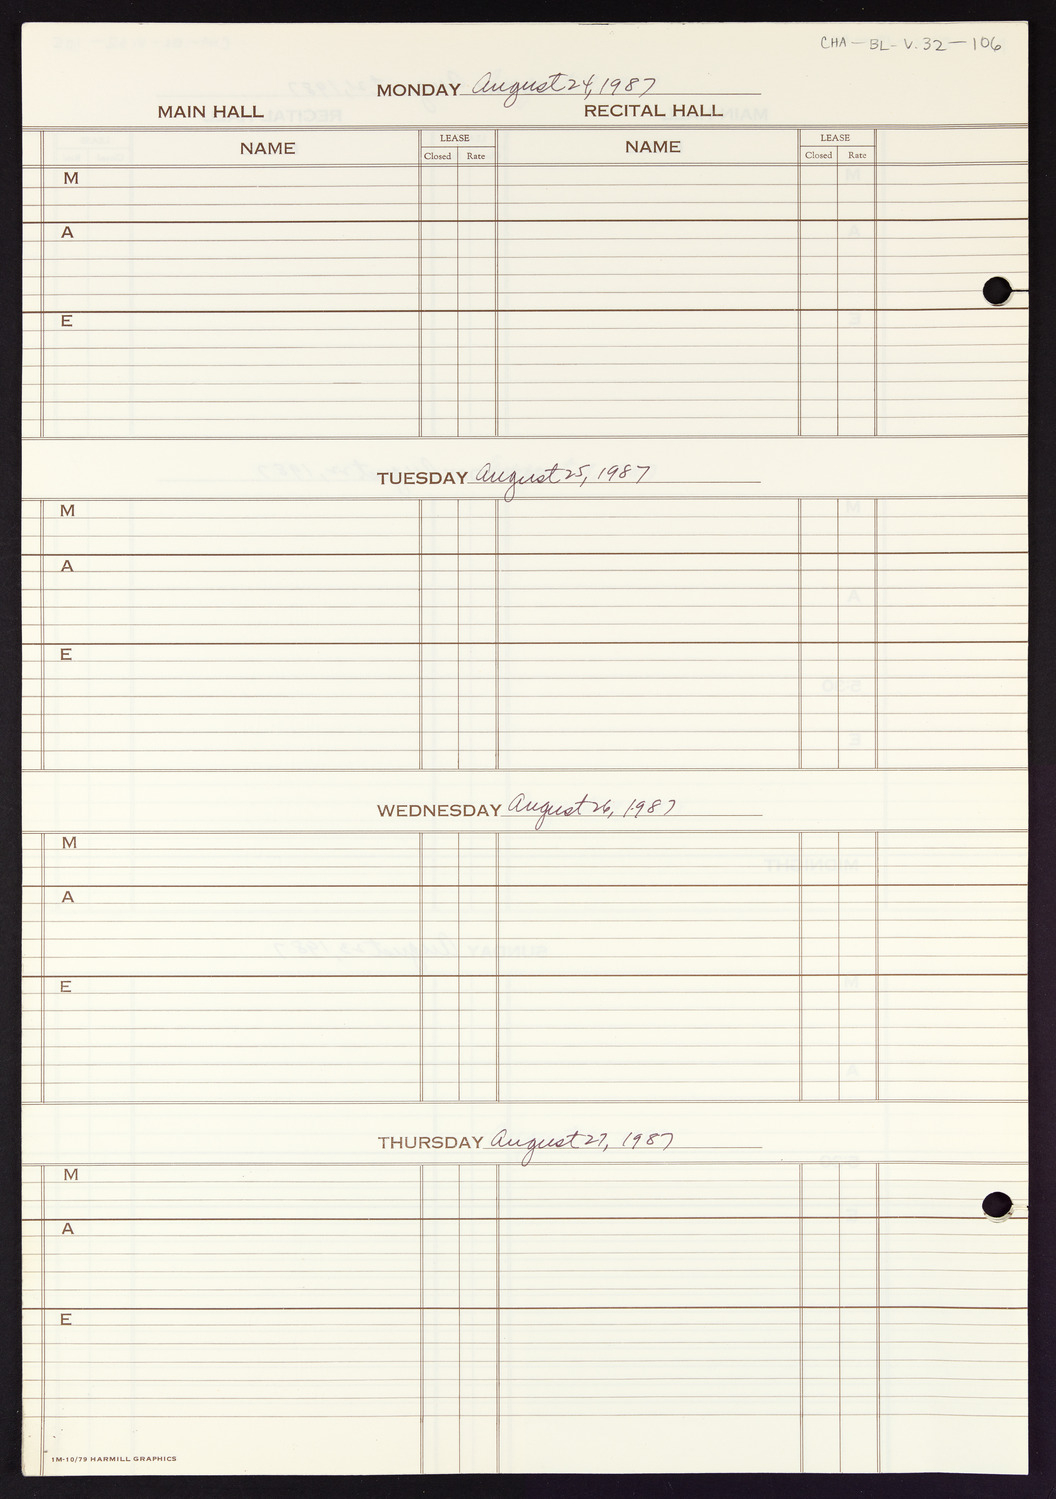 Carnegie Hall Booking Ledger, volume 32, page 106